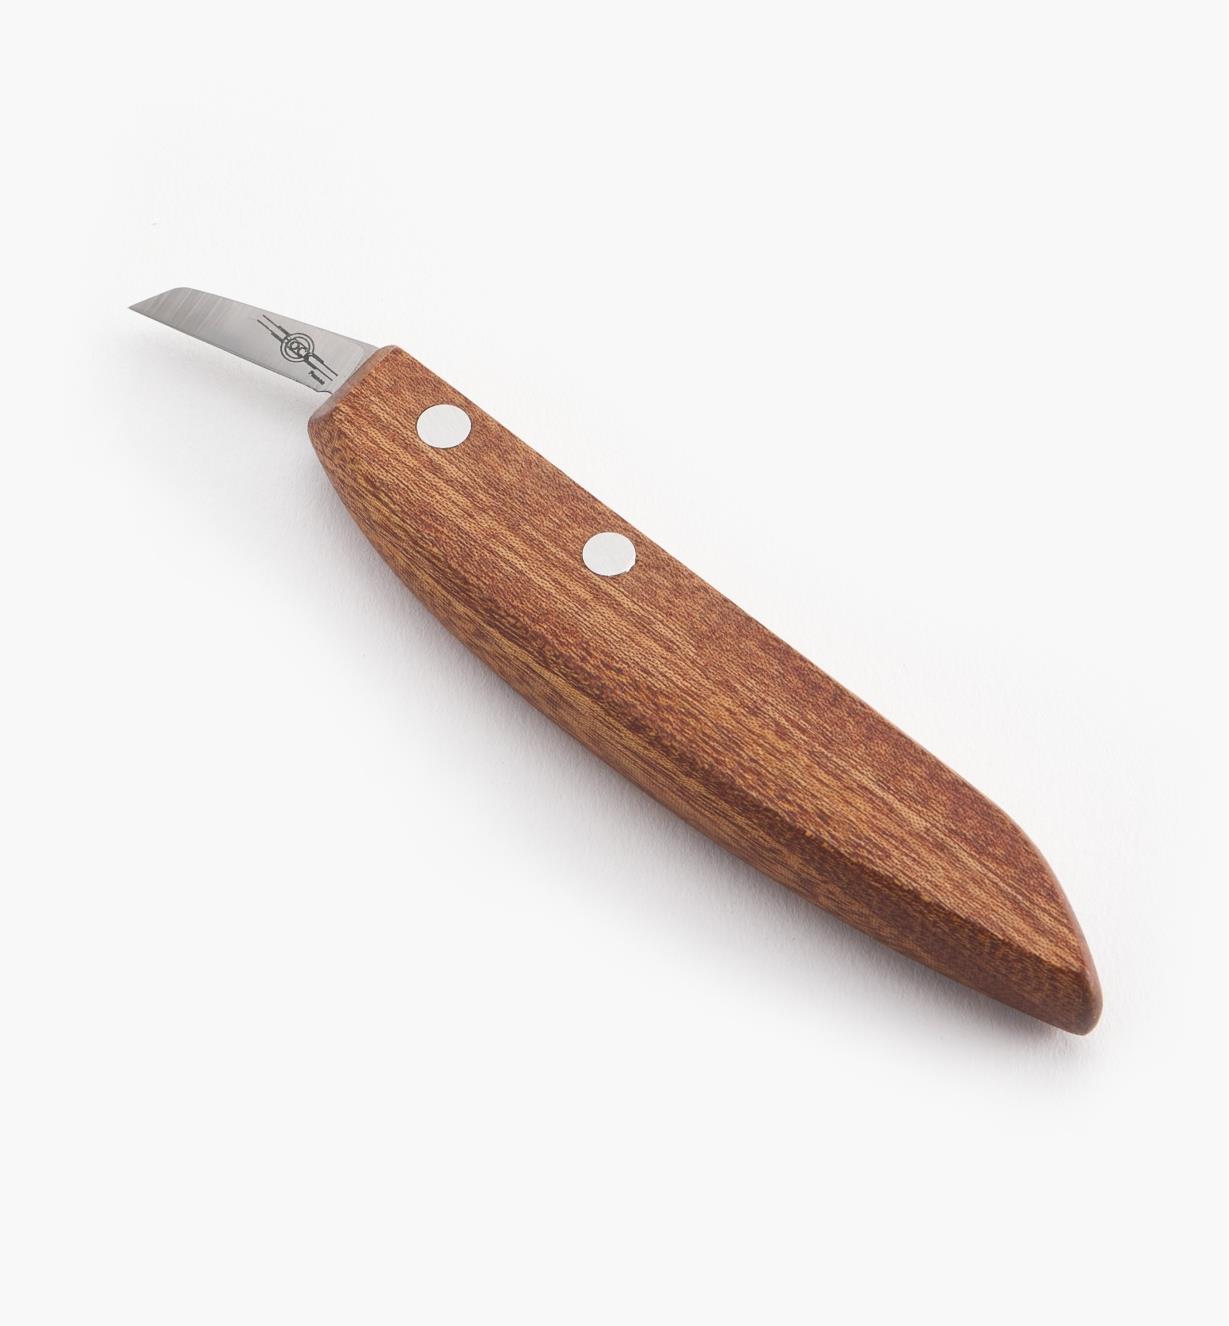 19P2352 - 1" Chip Carving Knife